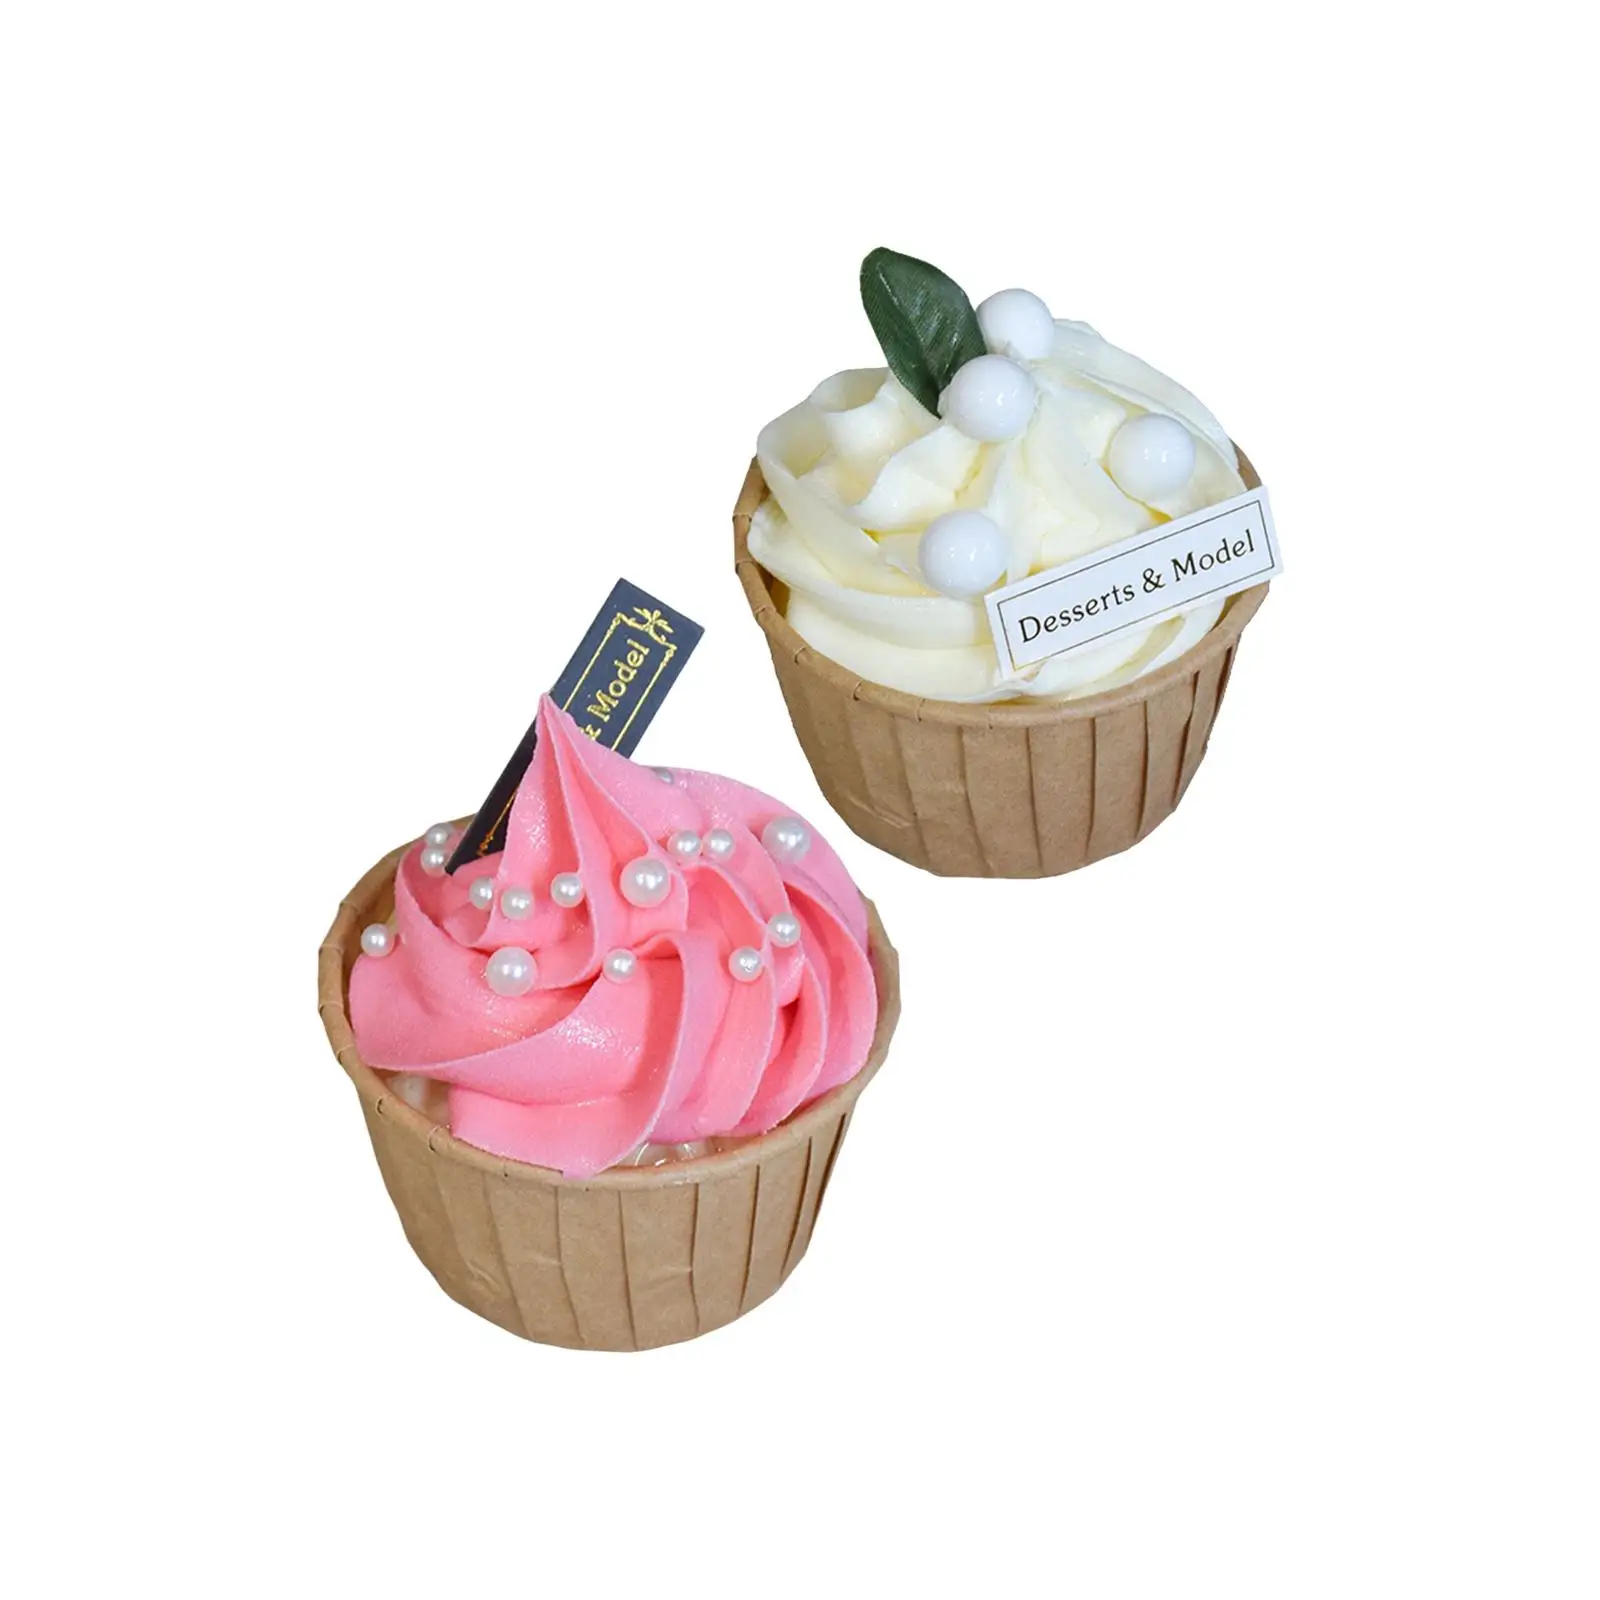 Realistic Artificial Cupcakes Fake Cupcakes Party Photo Props Faux Cupcakes Cupcake Model for Shop Window Display Party Crafts